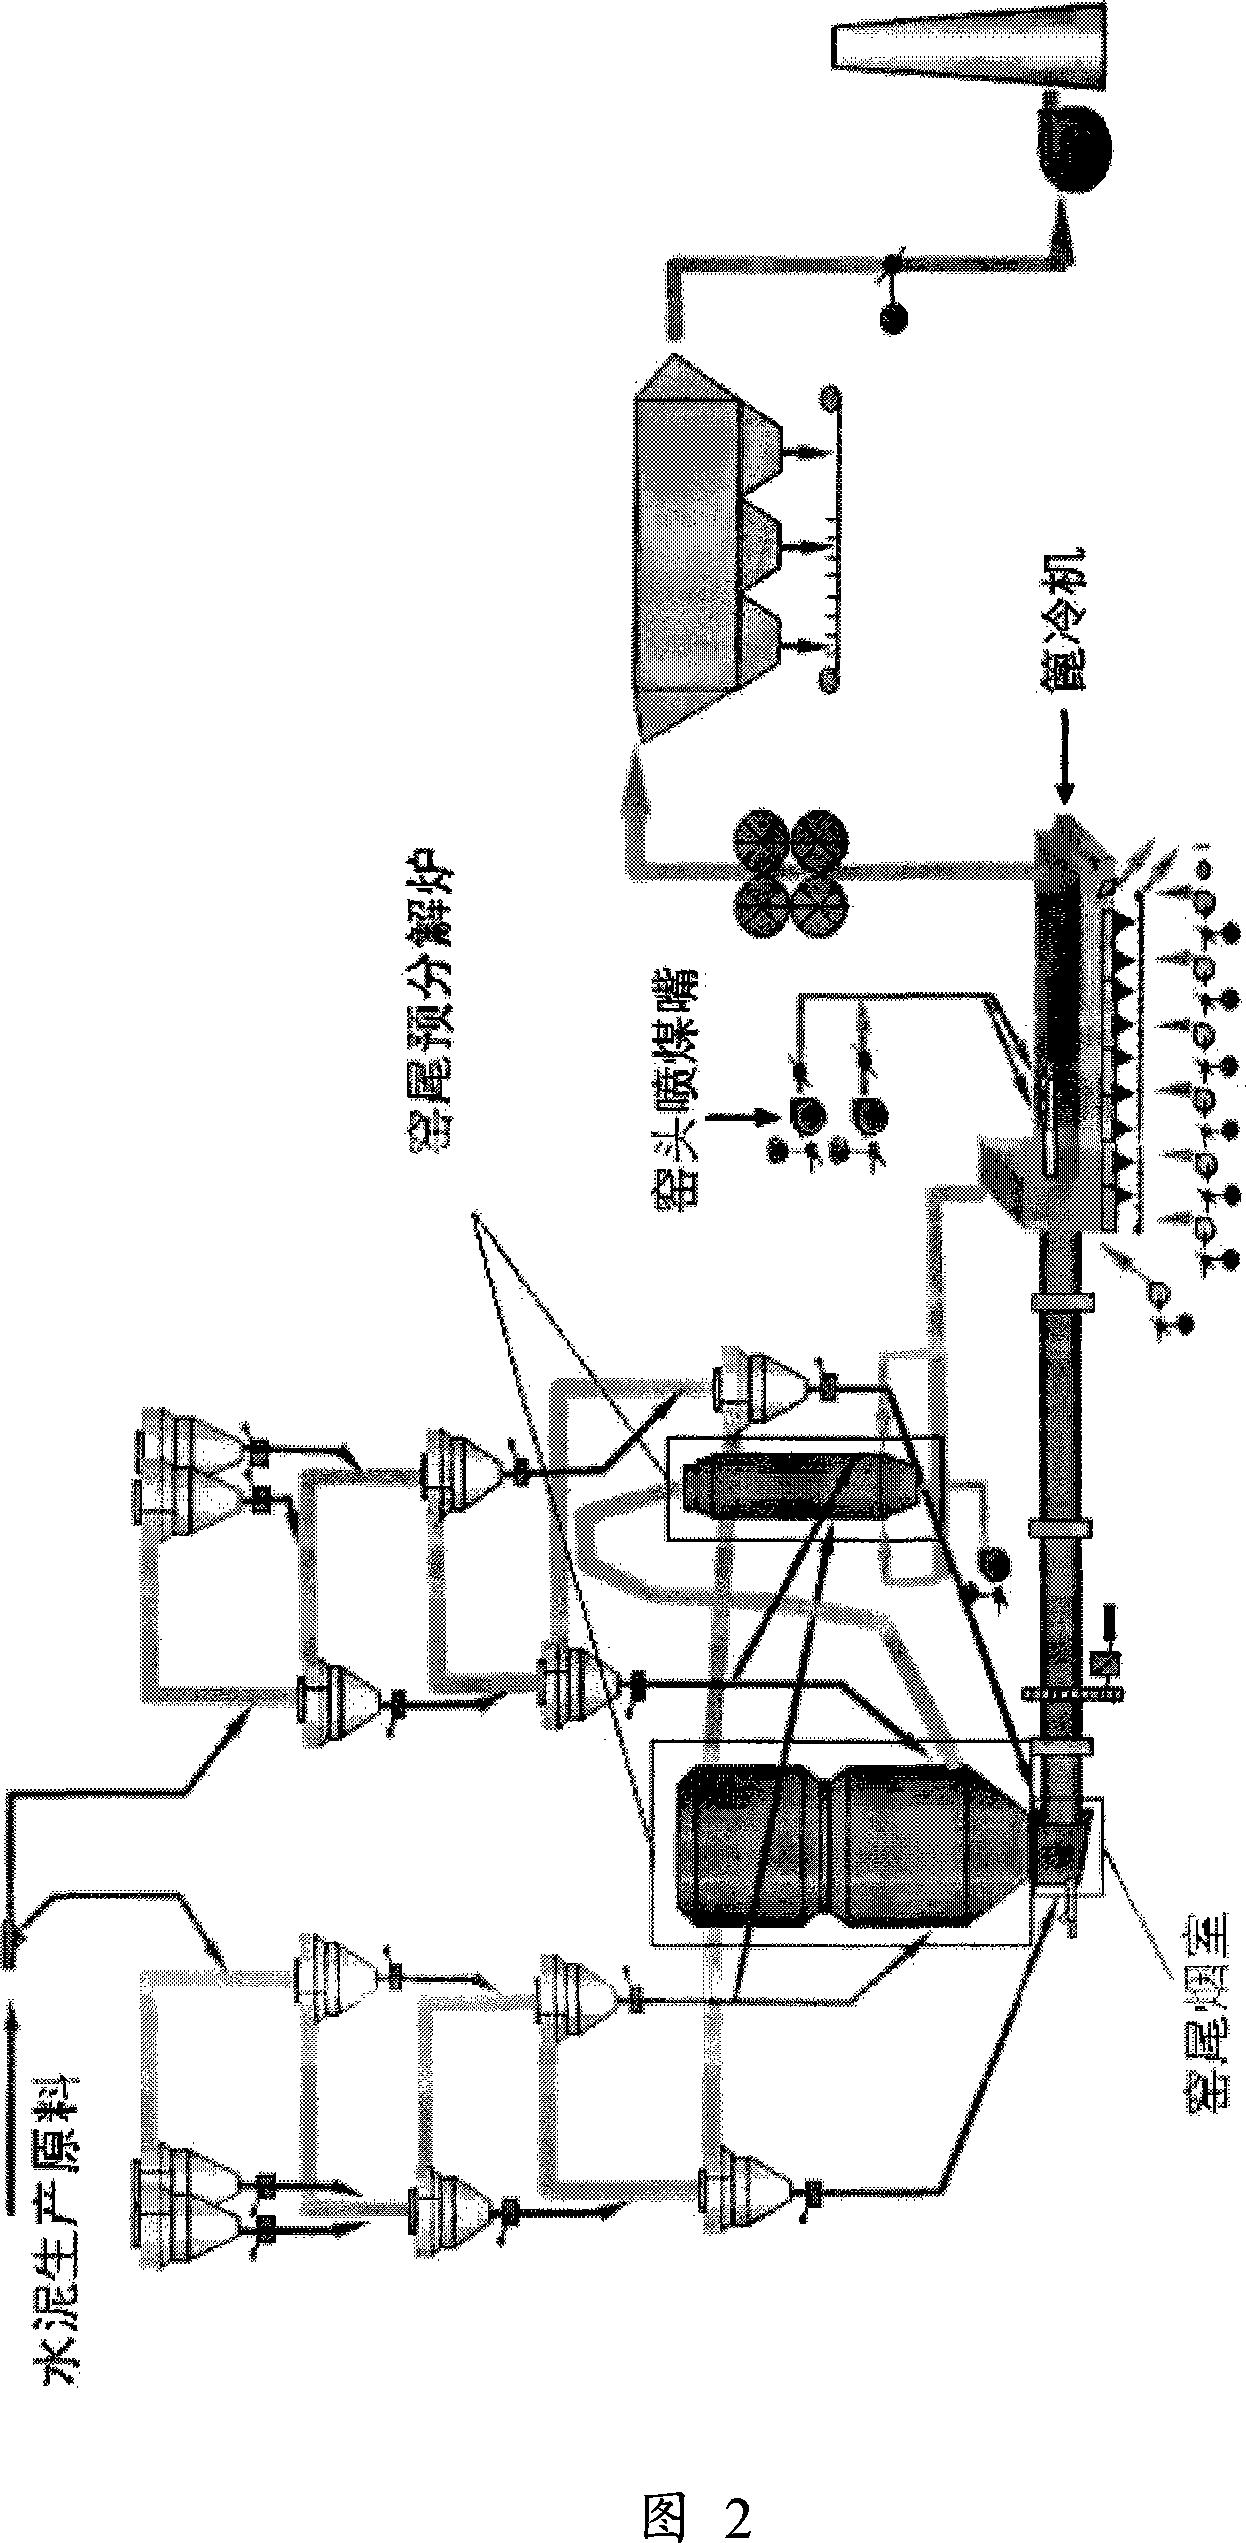 Method and device for processing sludge